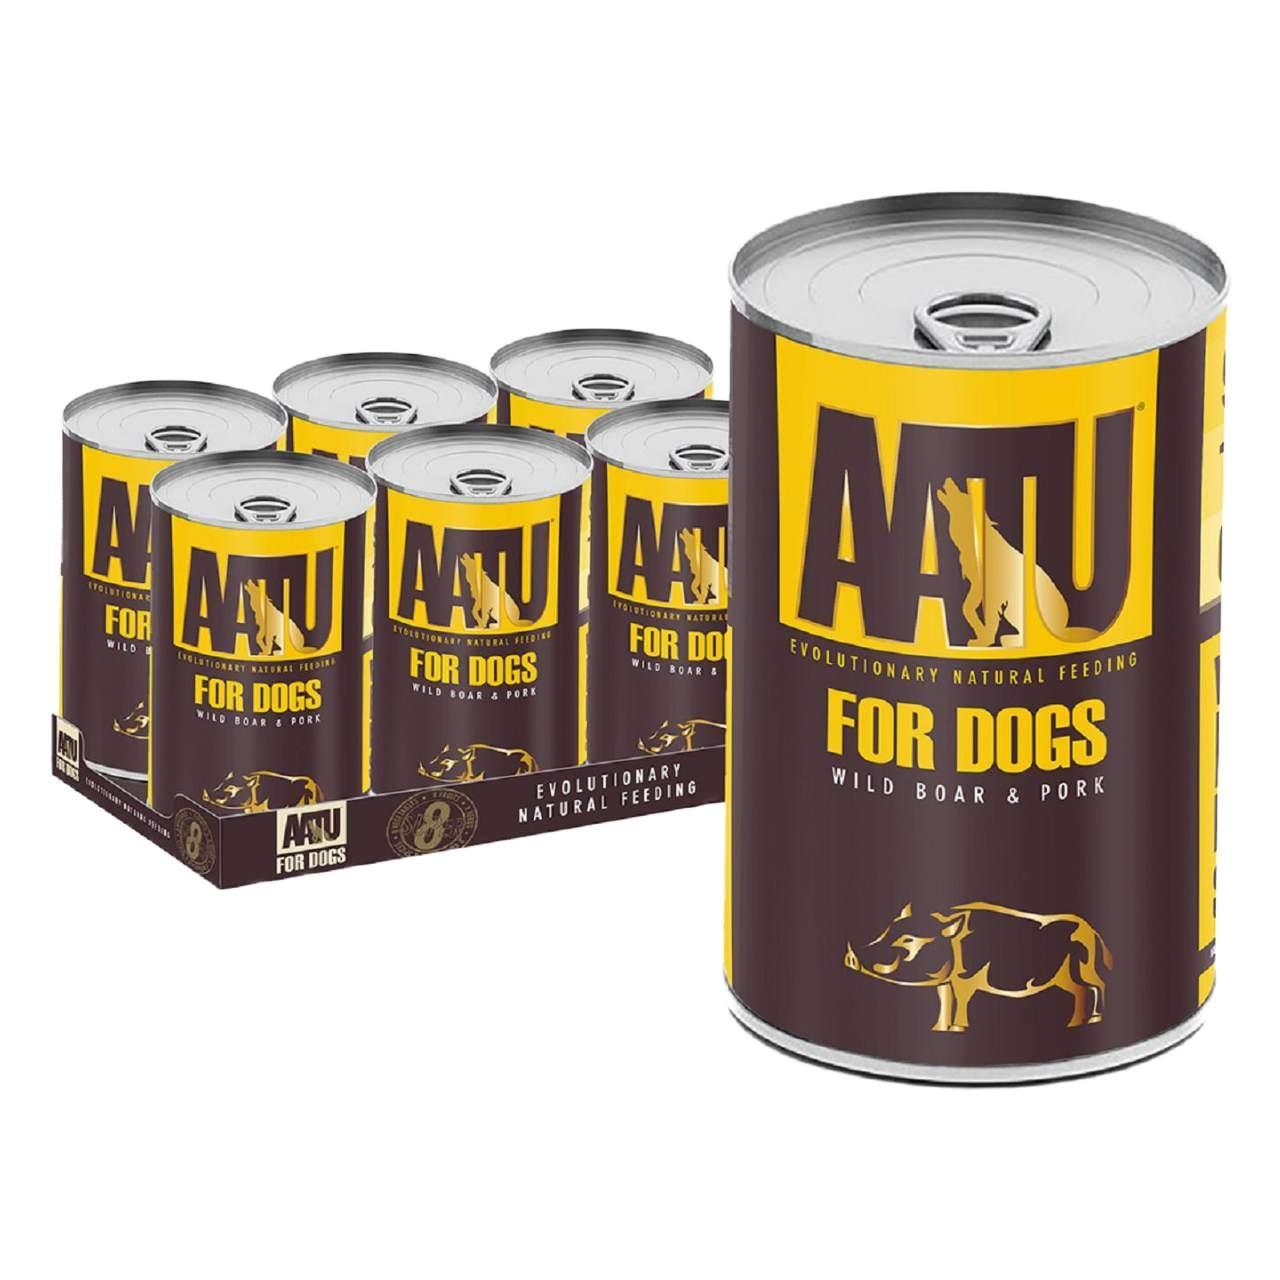 An image of AATU For Dogs Wild Boar and Pork Tins